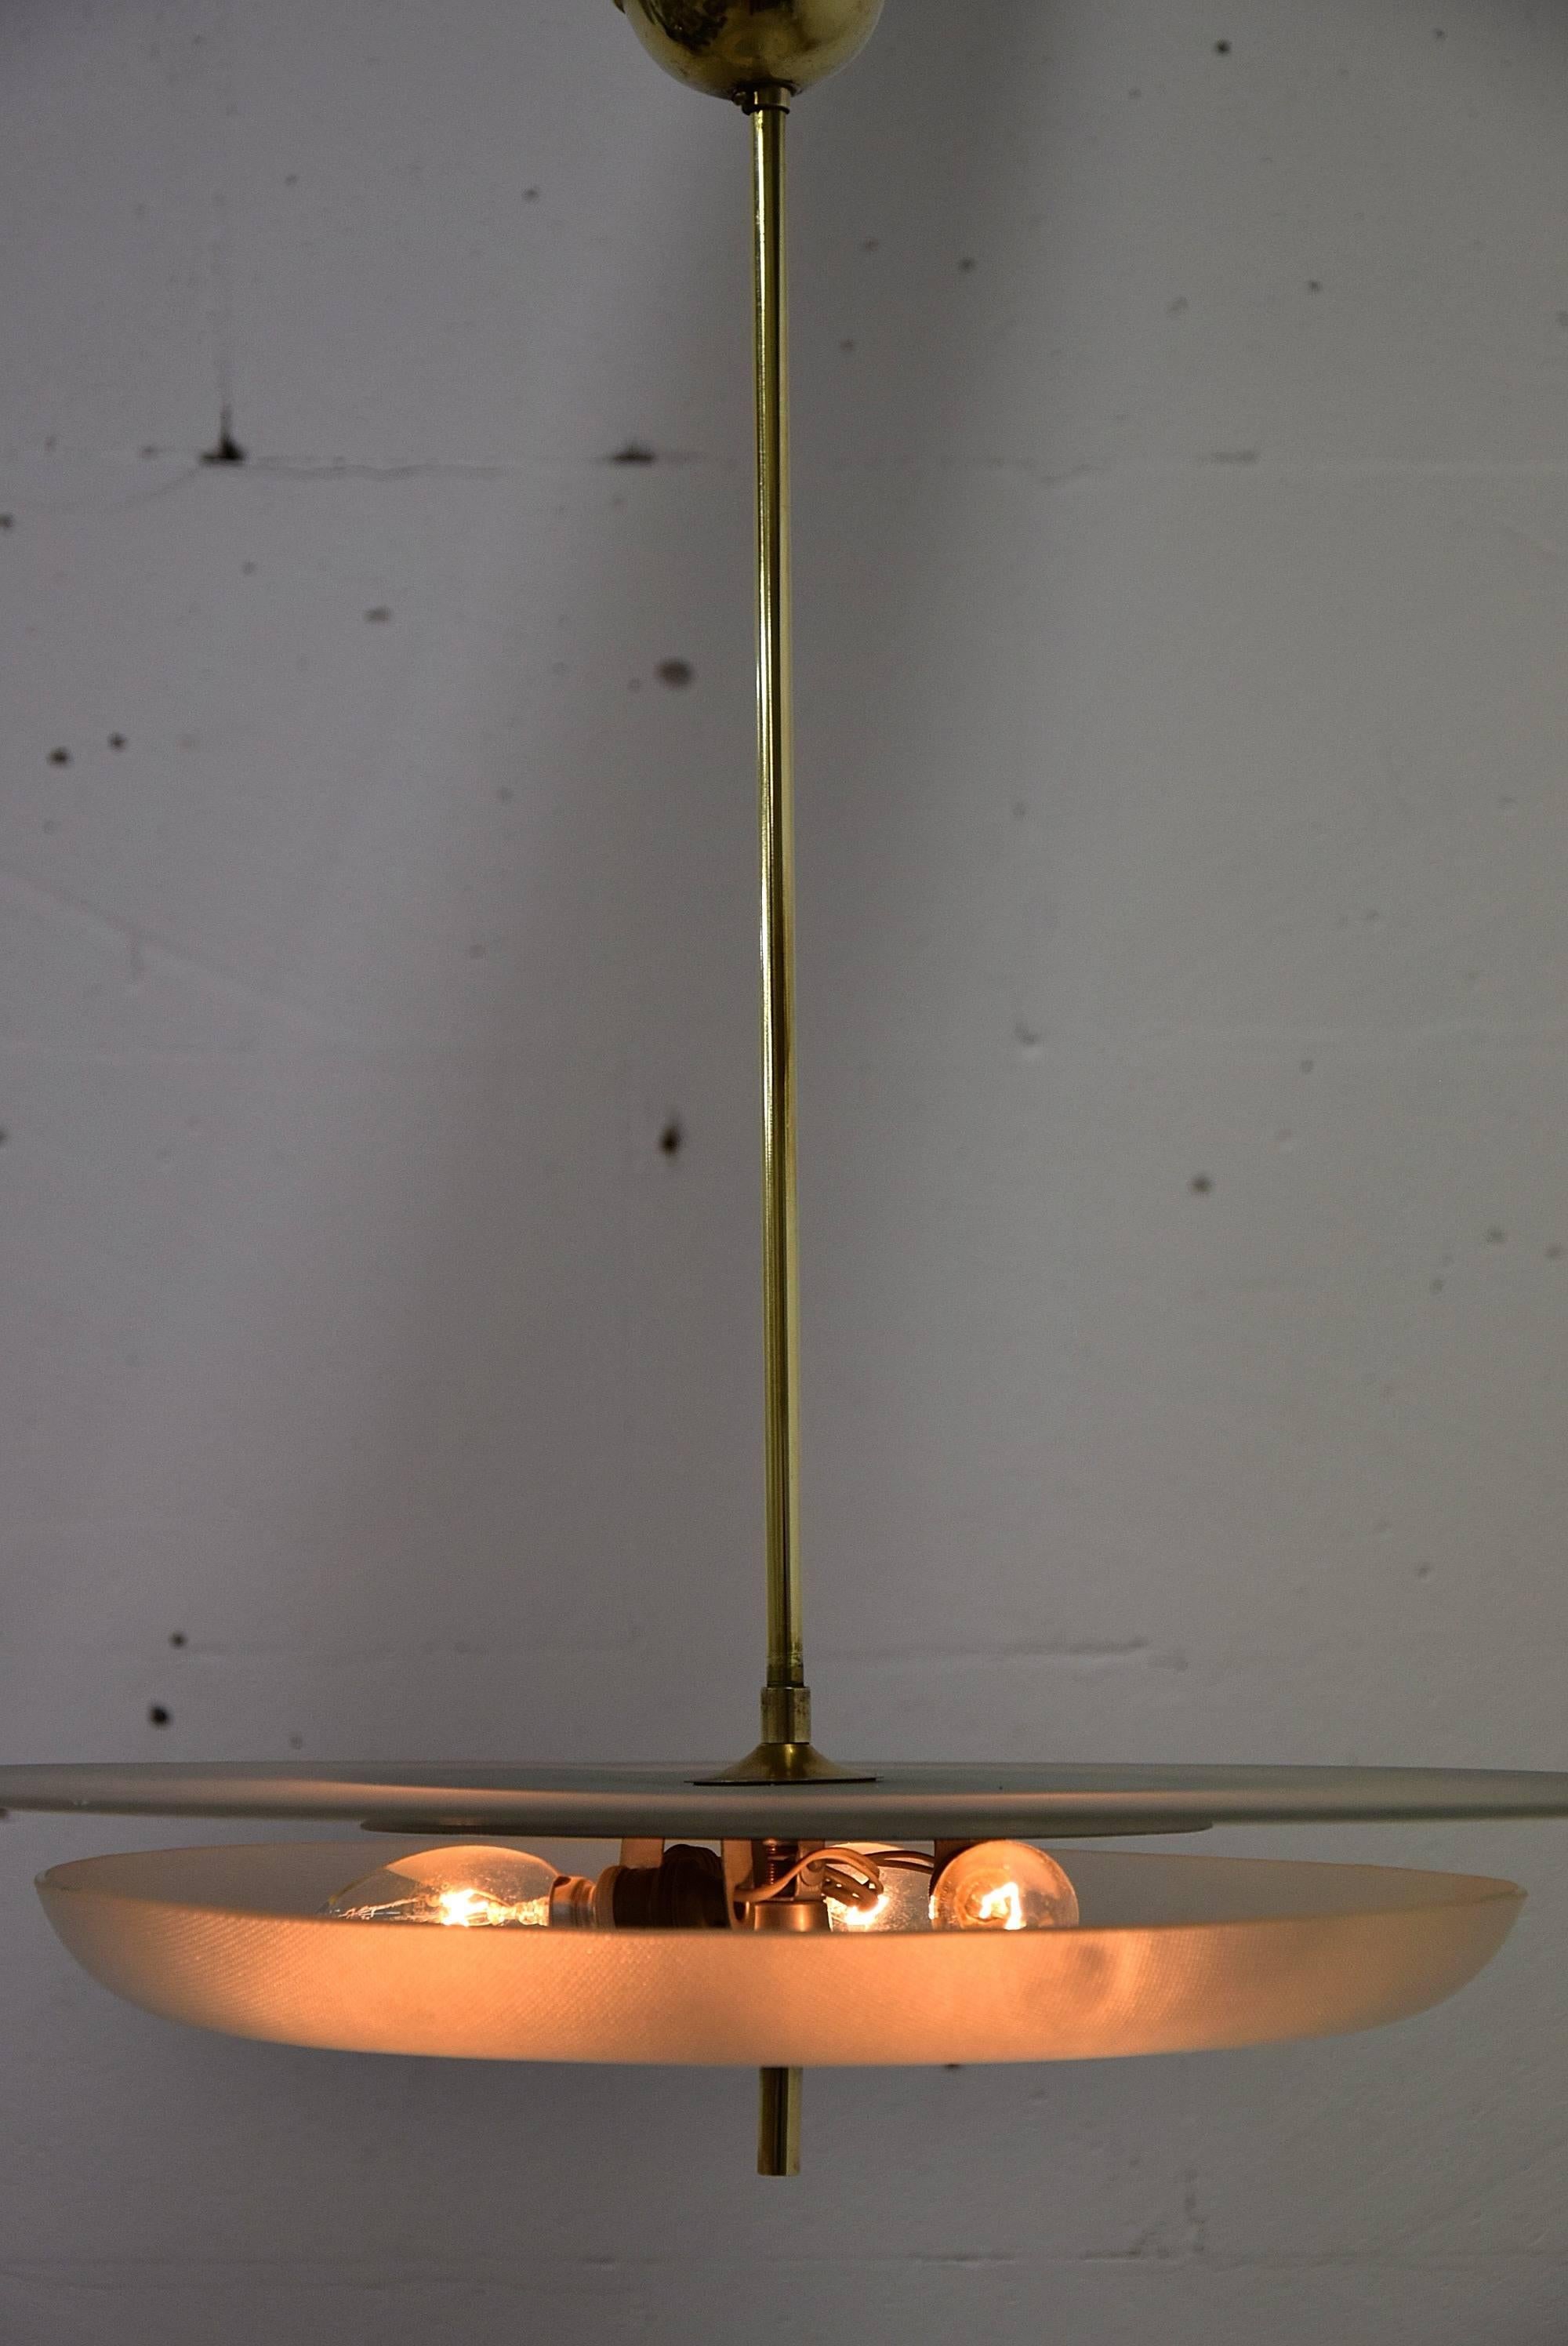 Chandelier Mid Century modern Fontana Arte attributed.
Beautiful and sophisticated 1940s ceiling lamp attributed to Pietra Chiesa for Fontana Arte

The lamp holds three lightbulbs and is in fantastic condition.

Measurements: H 62 x D 48 cm.

Lamp